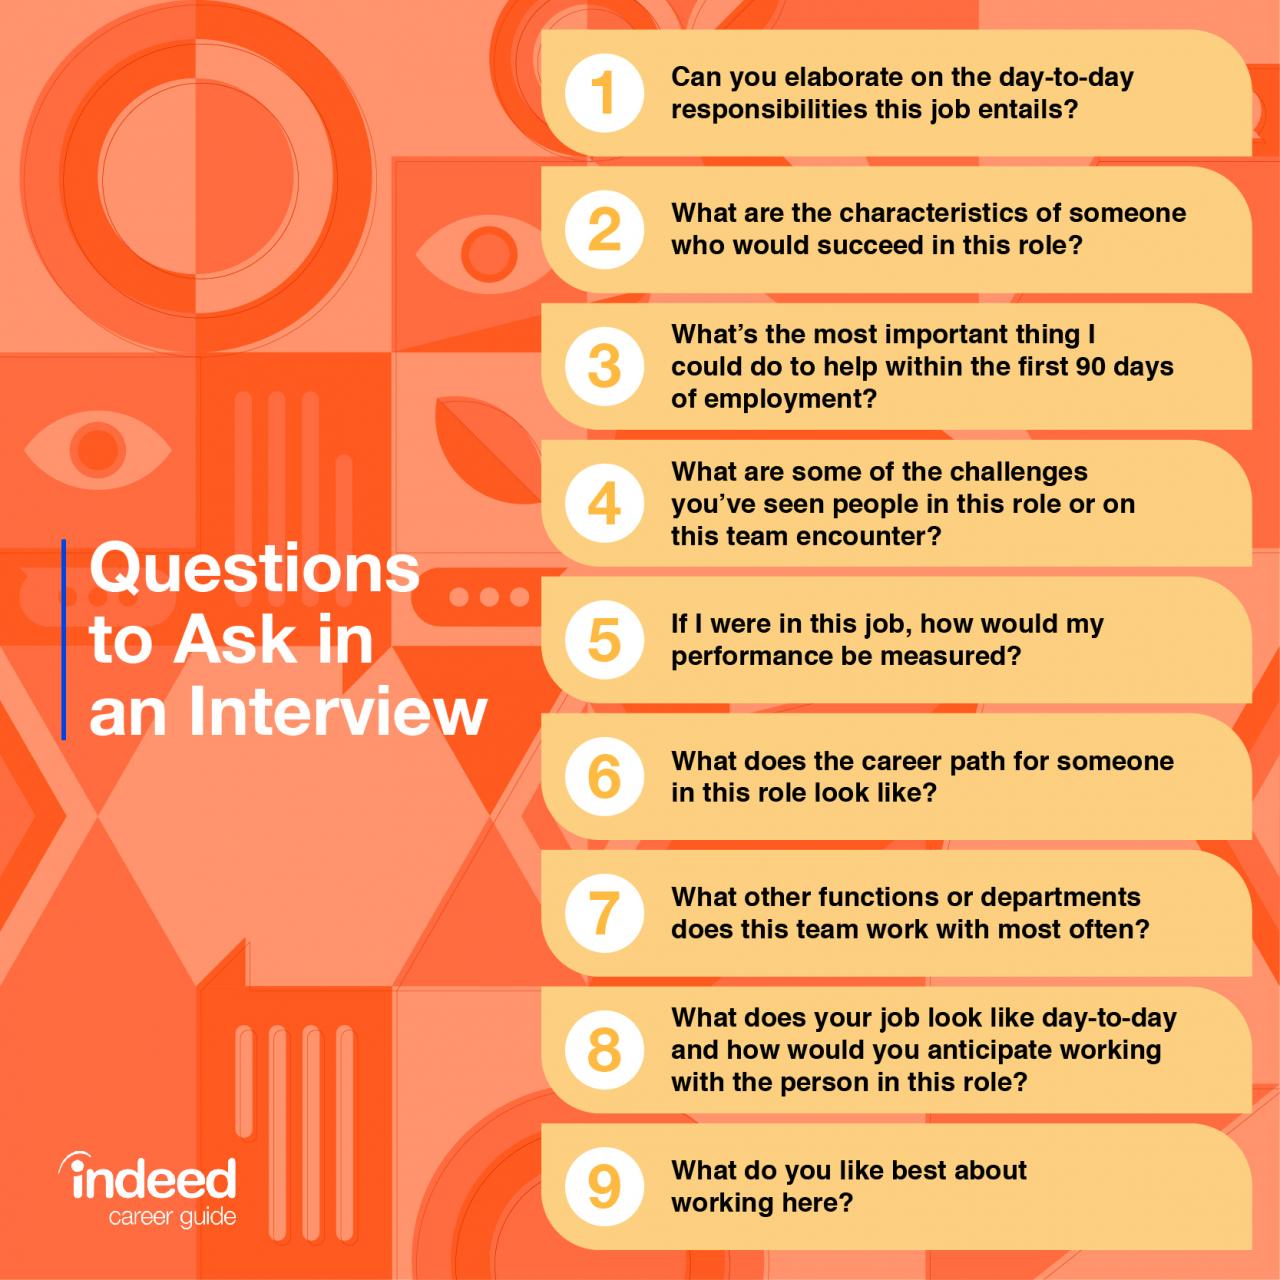 Good questions to ask in an interviewer